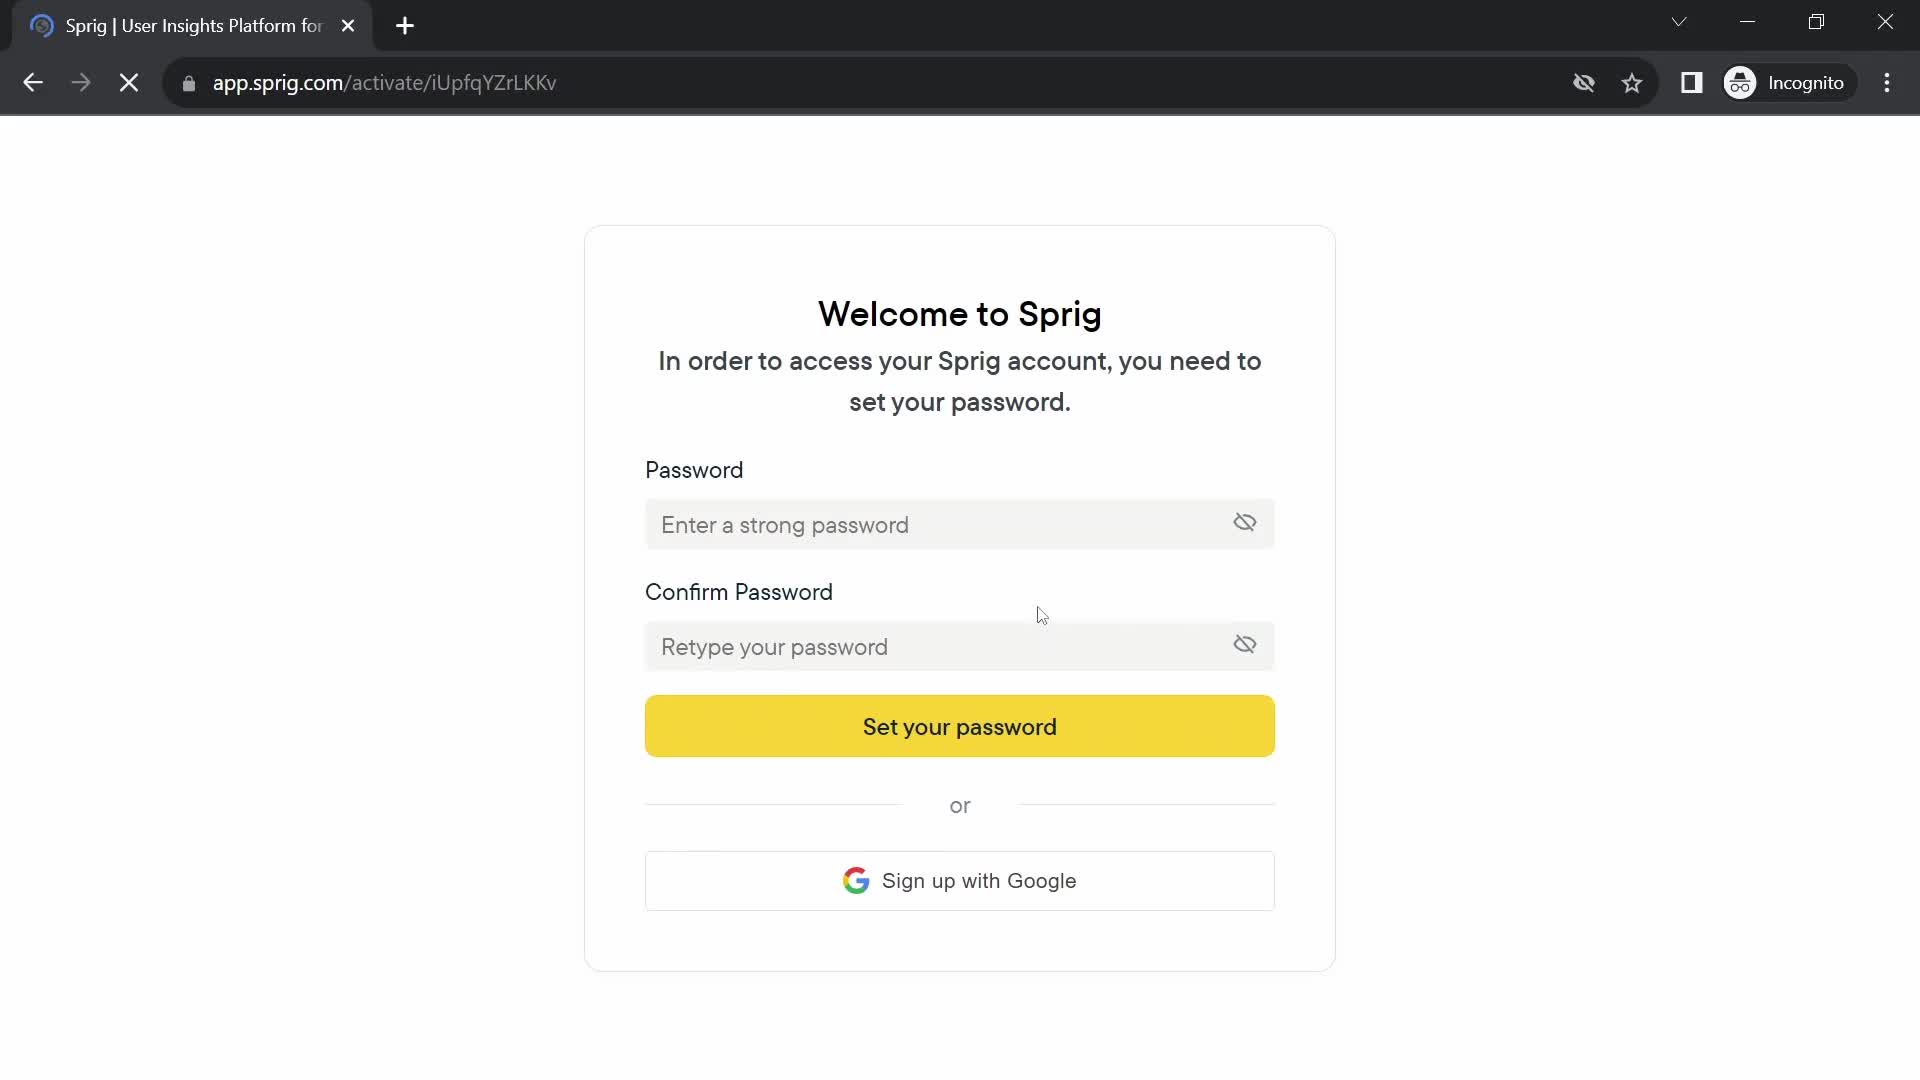 Screenshot of Set password on Accepting an invite on Sprig user flow